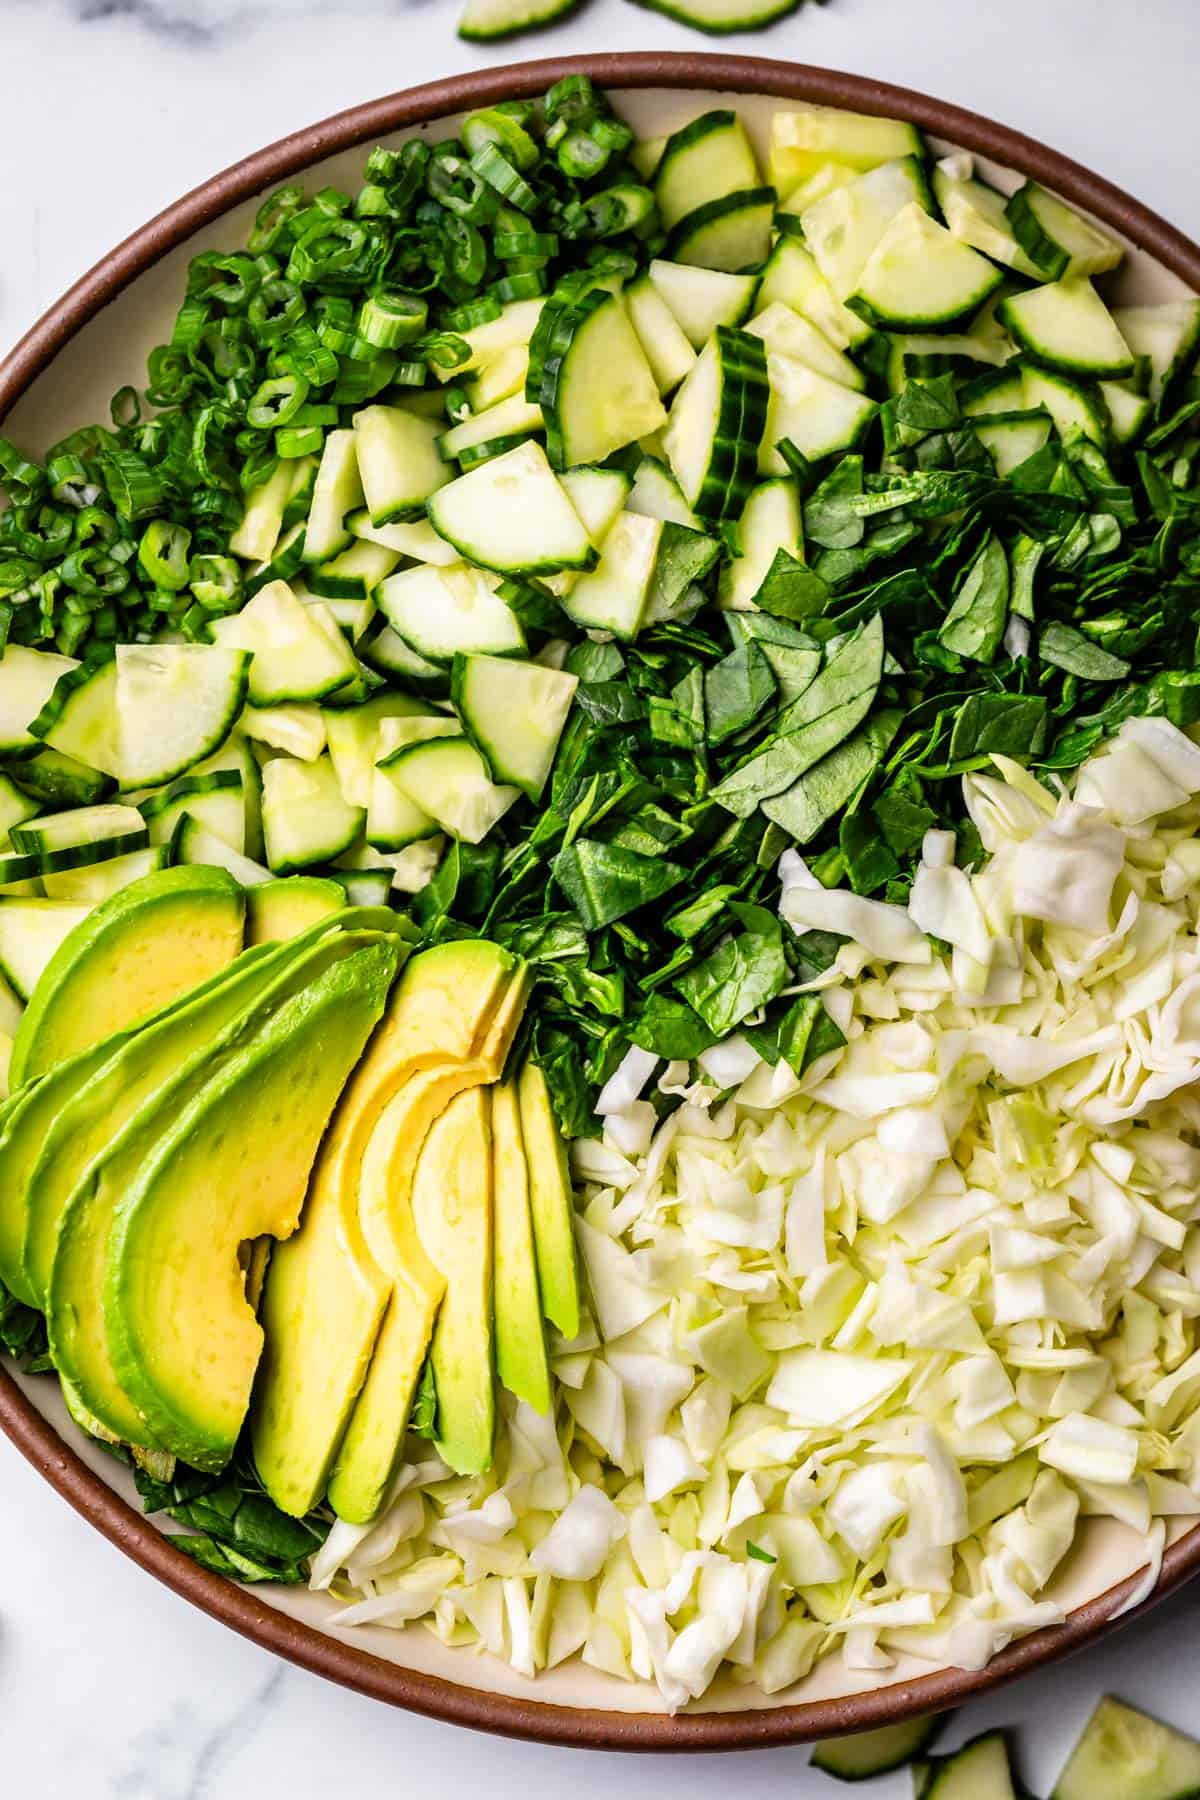 chopped green onion, cucumber, spinach, cabbage, and avocado lined up on a plate.